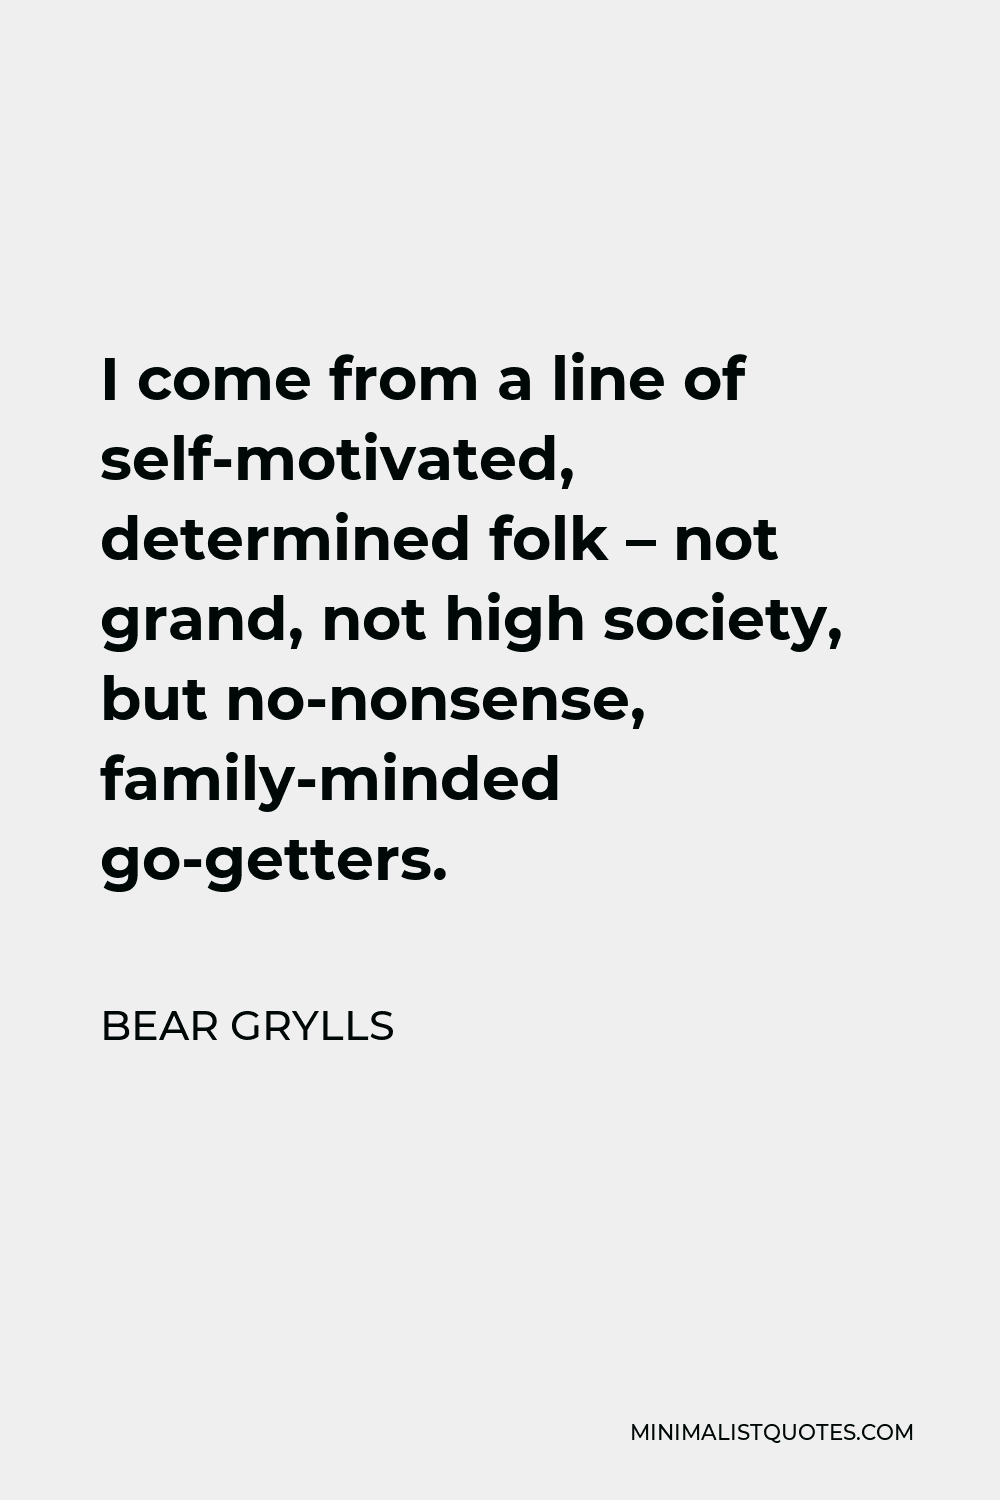 Bear Grylls Quote - I come from a line of self-motivated, determined folk – not grand, not high society, but no-nonsense, family-minded go-getters.